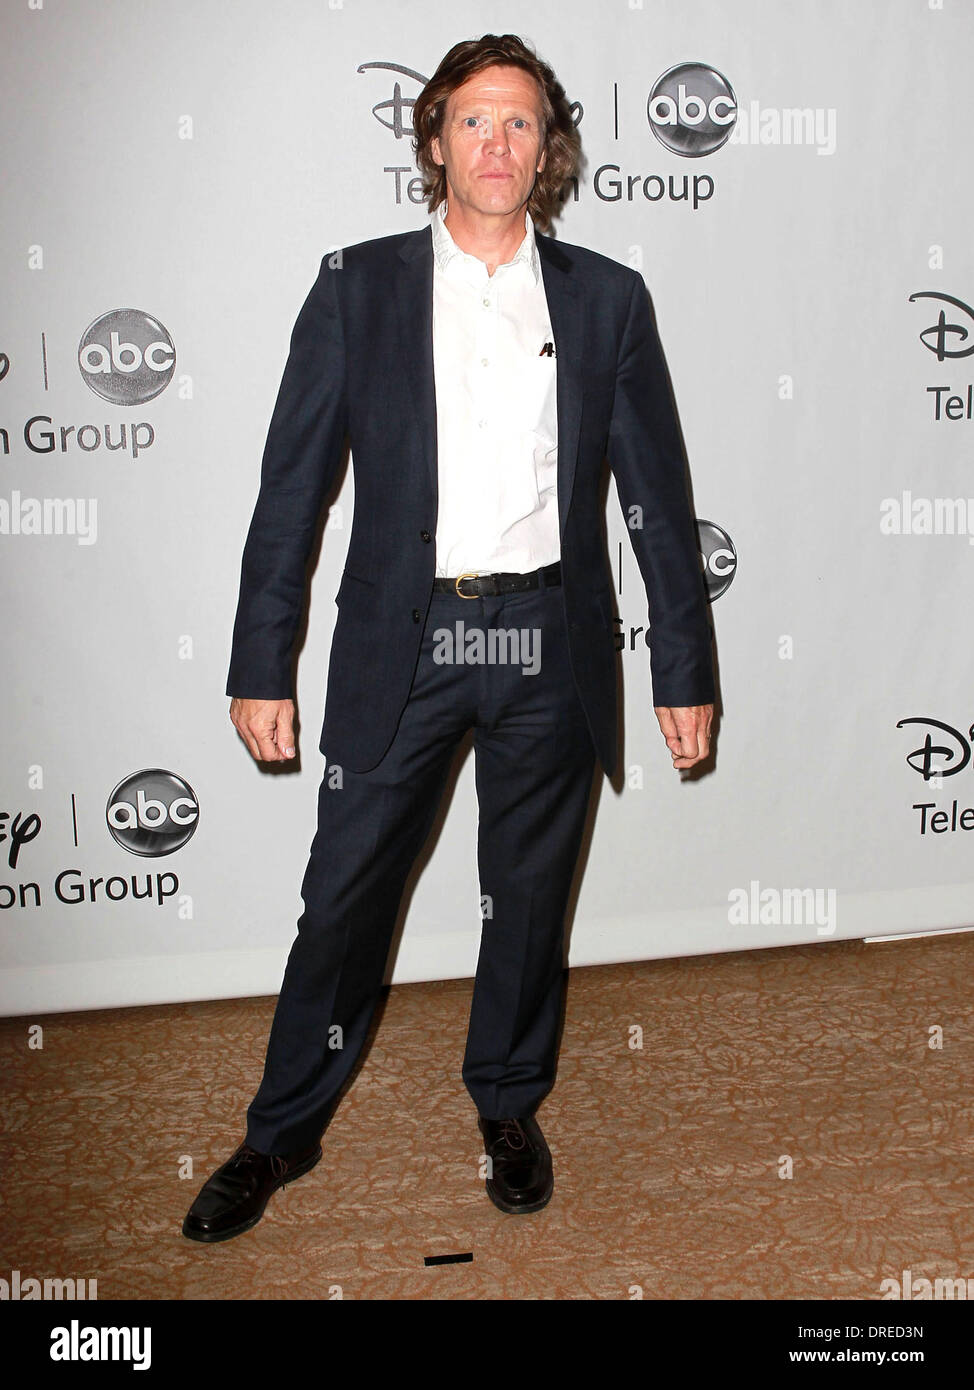 Simon Templeman 2012 TCA Summer Press Tour - Disney ABC Television Group Party held at The Beverly Hilton Hotel Beverly Hills, California - 27.07.12 Stock Photo